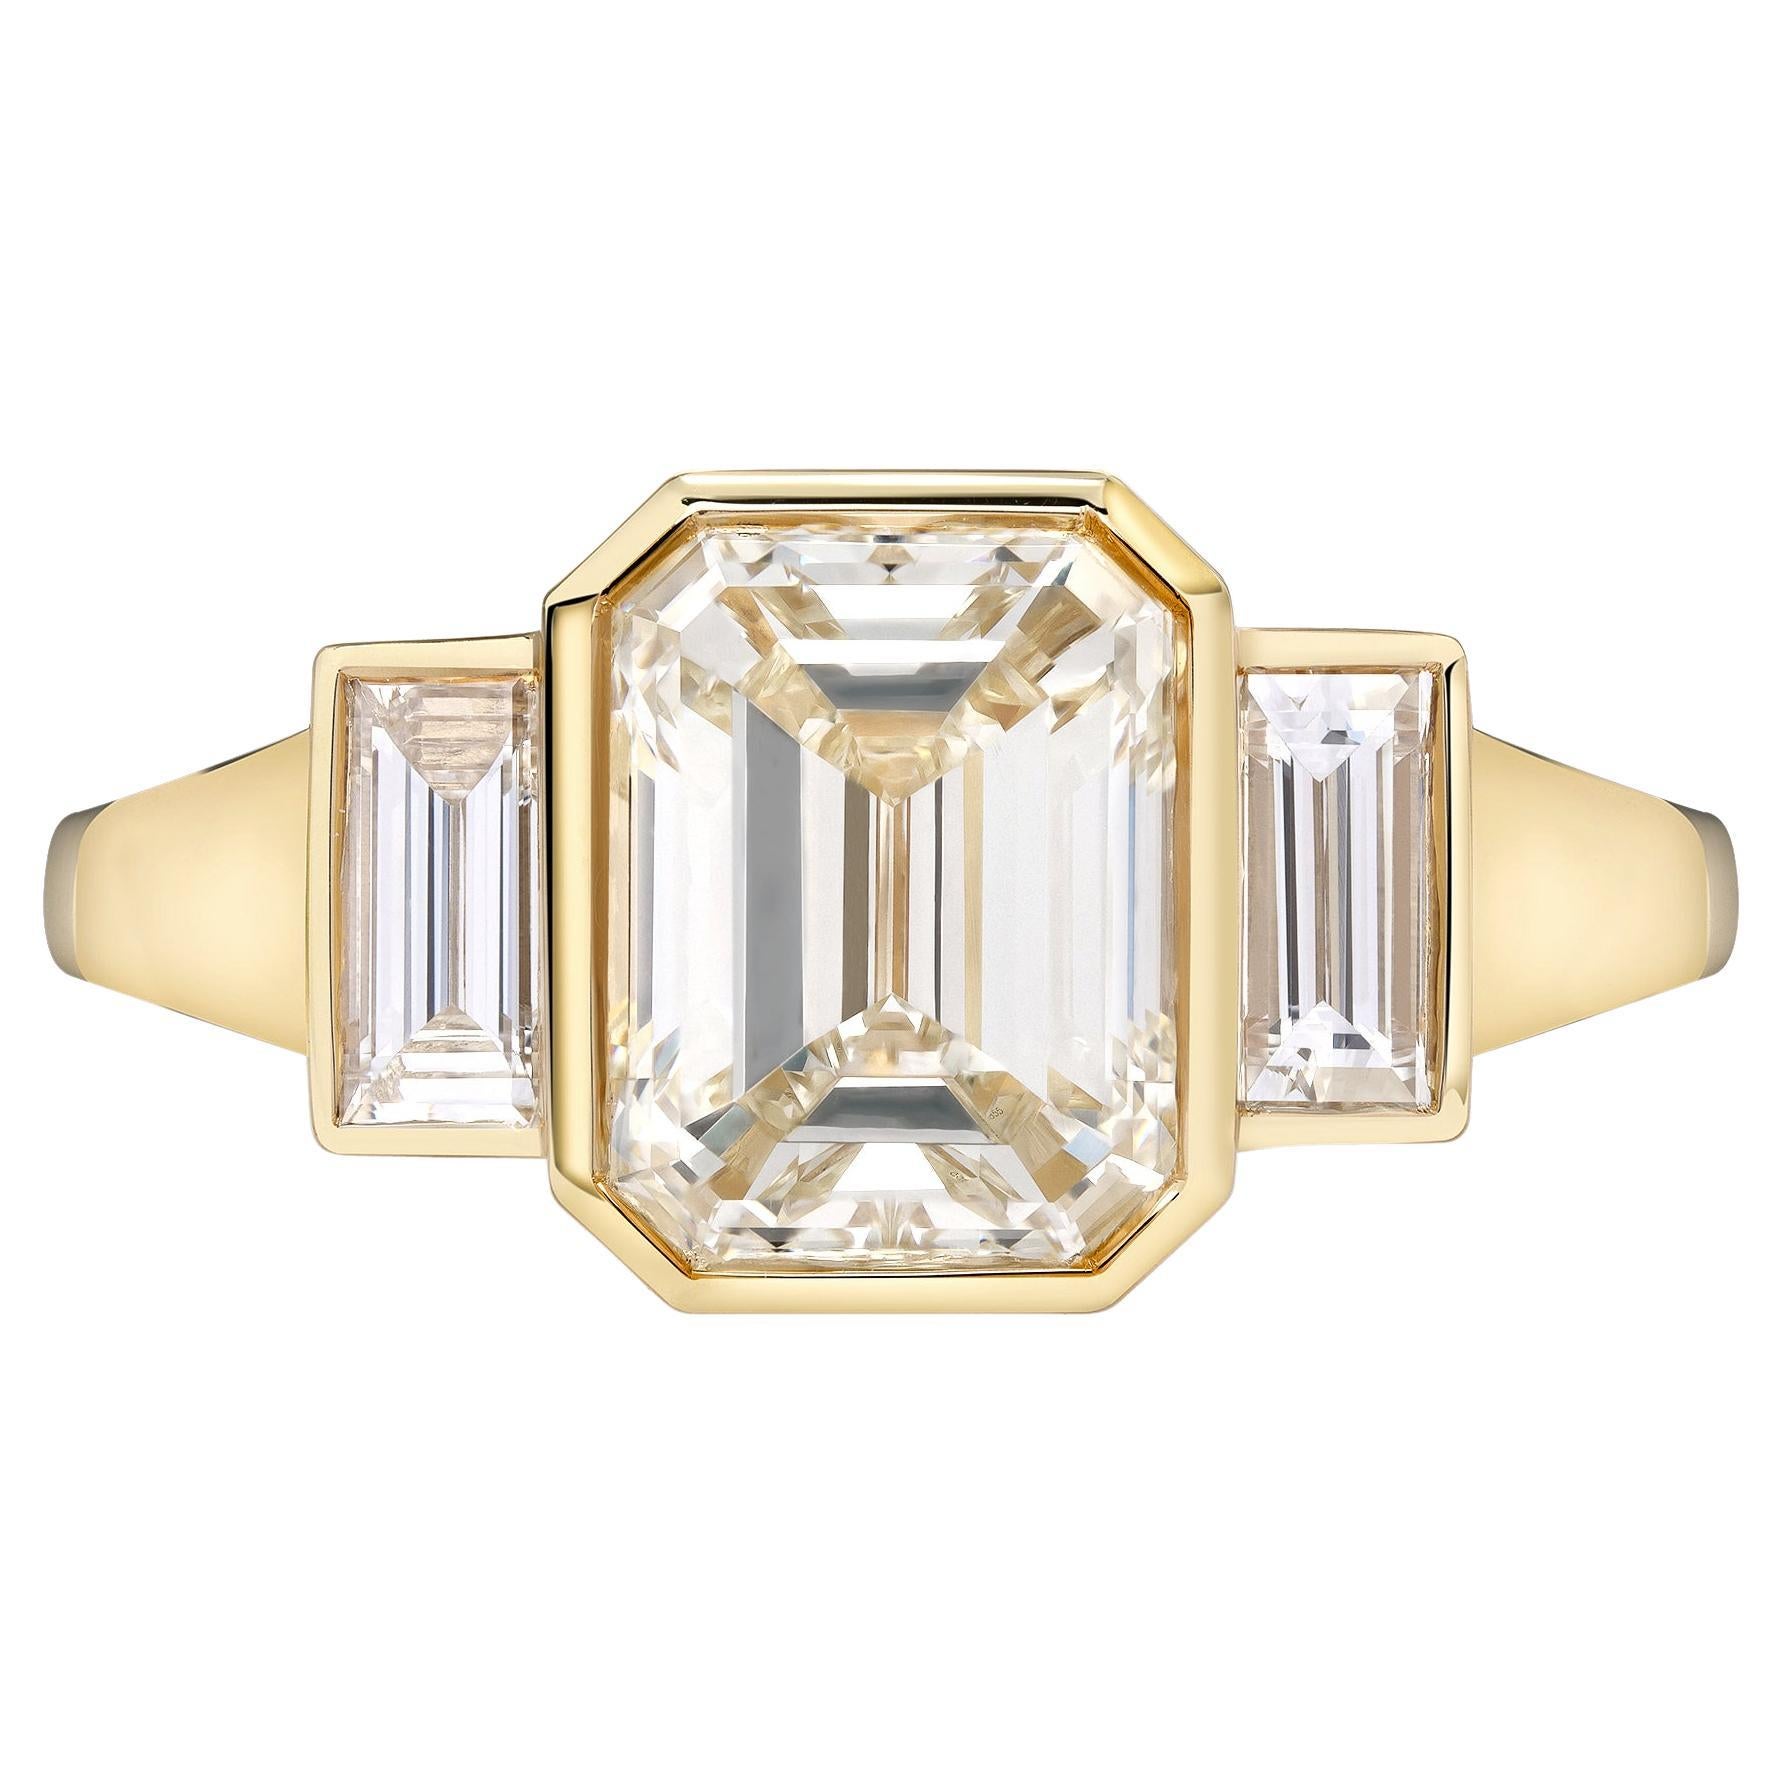 Handcrafted Amelia Emerald Cut Diamond Ring by Single Stone